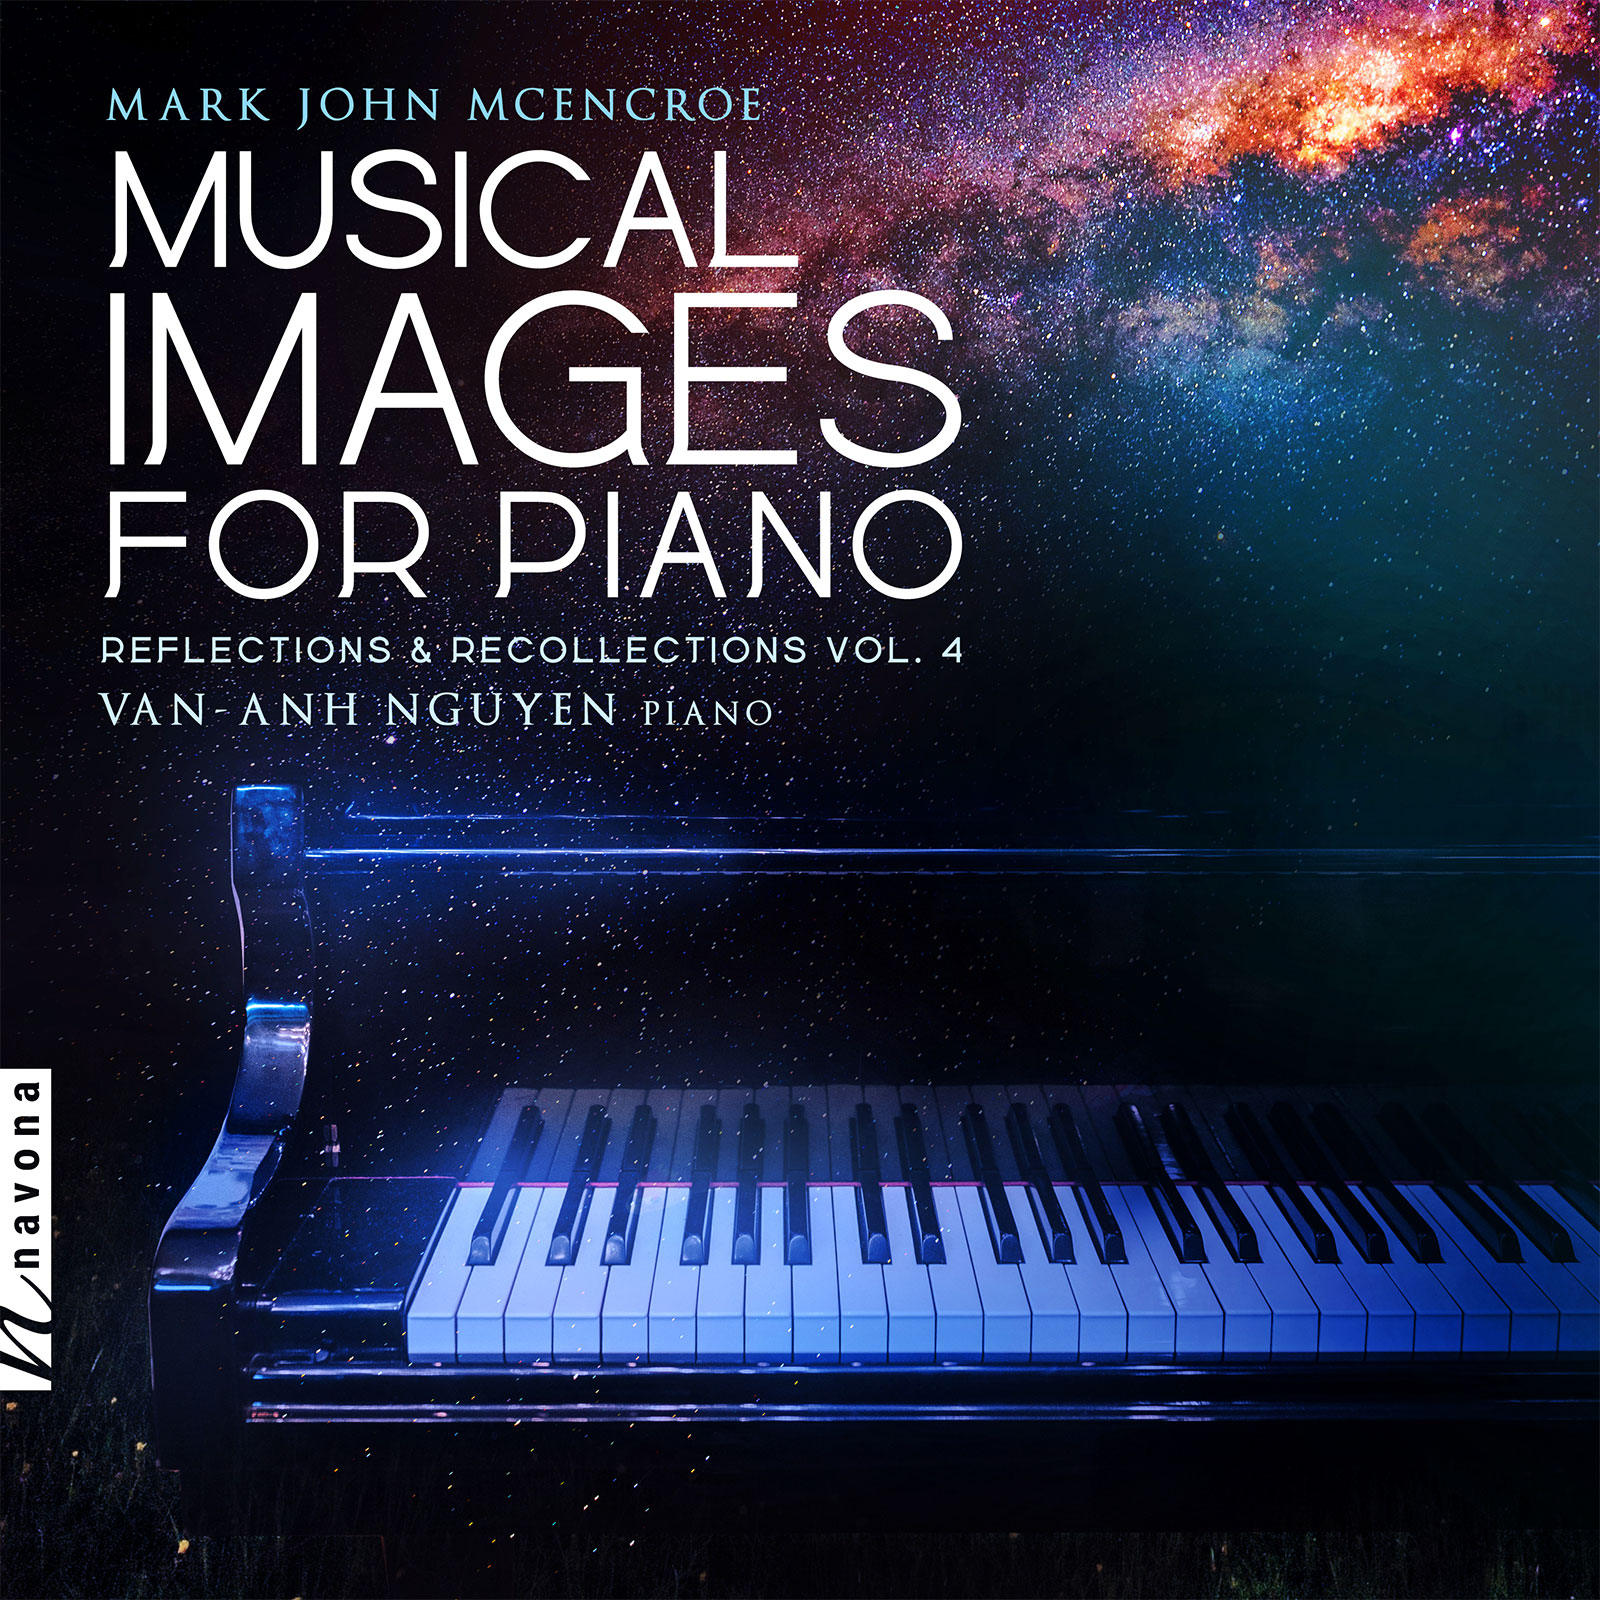 MUSICAL IMAGES FOR PIANO: REFLECTIONS & RECOLLECTIONS VOL. 4 - Album Cover